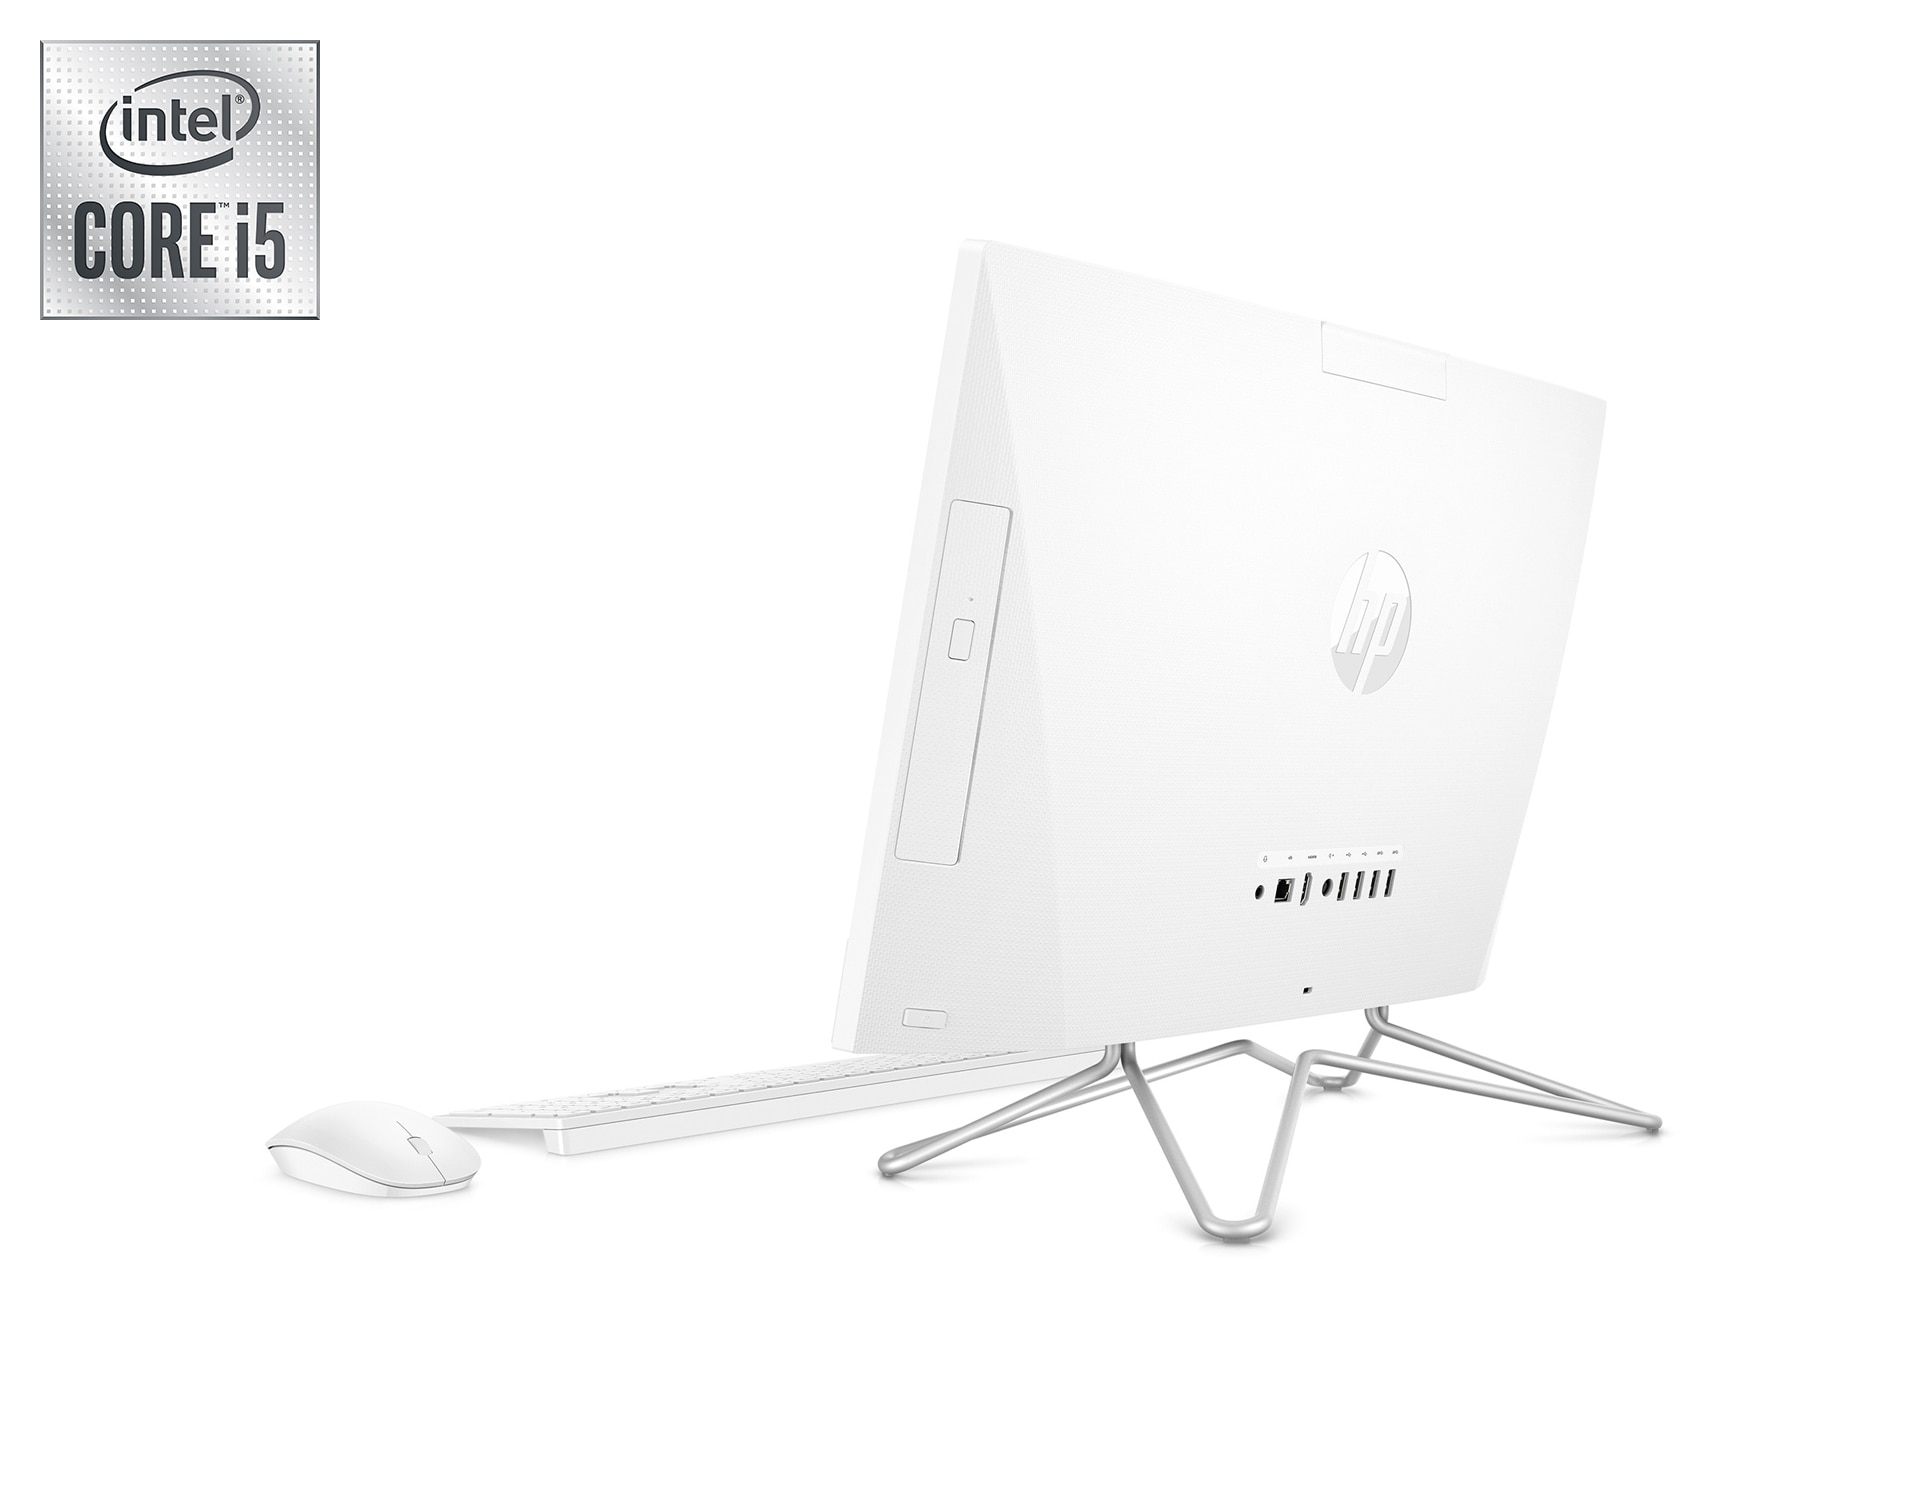 HP All-in-One 22-df（インテル） 製品詳細 - デスクトップパソコン 